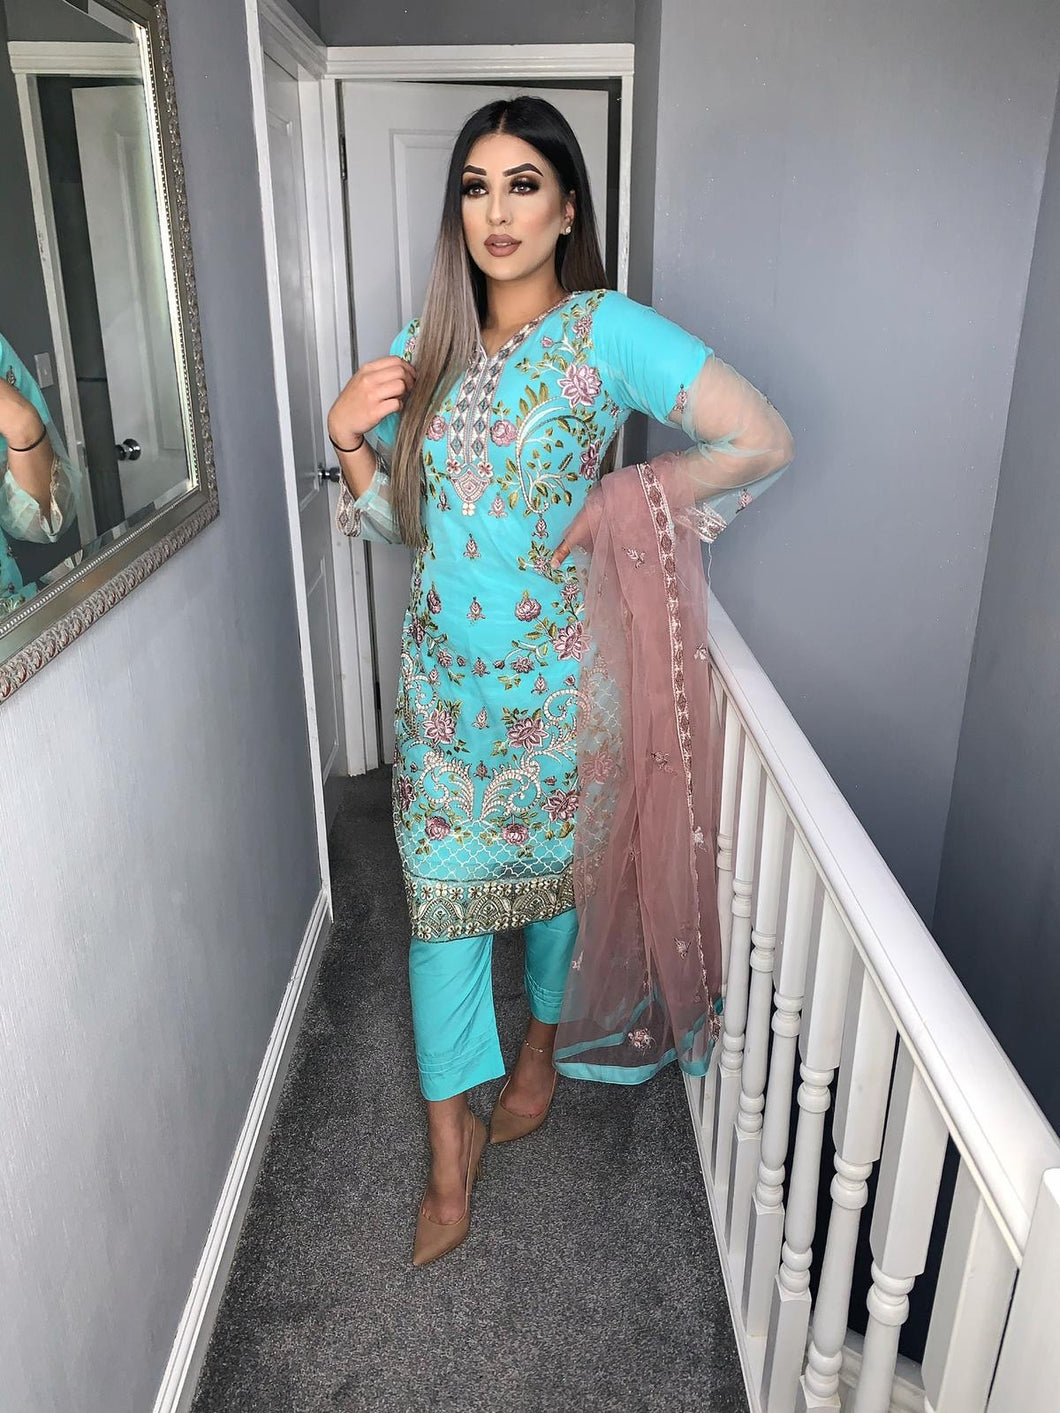 3pc Blue Embroidered Shalwar Kameez with light brown net dupatta Stitched Suit Ready to wear